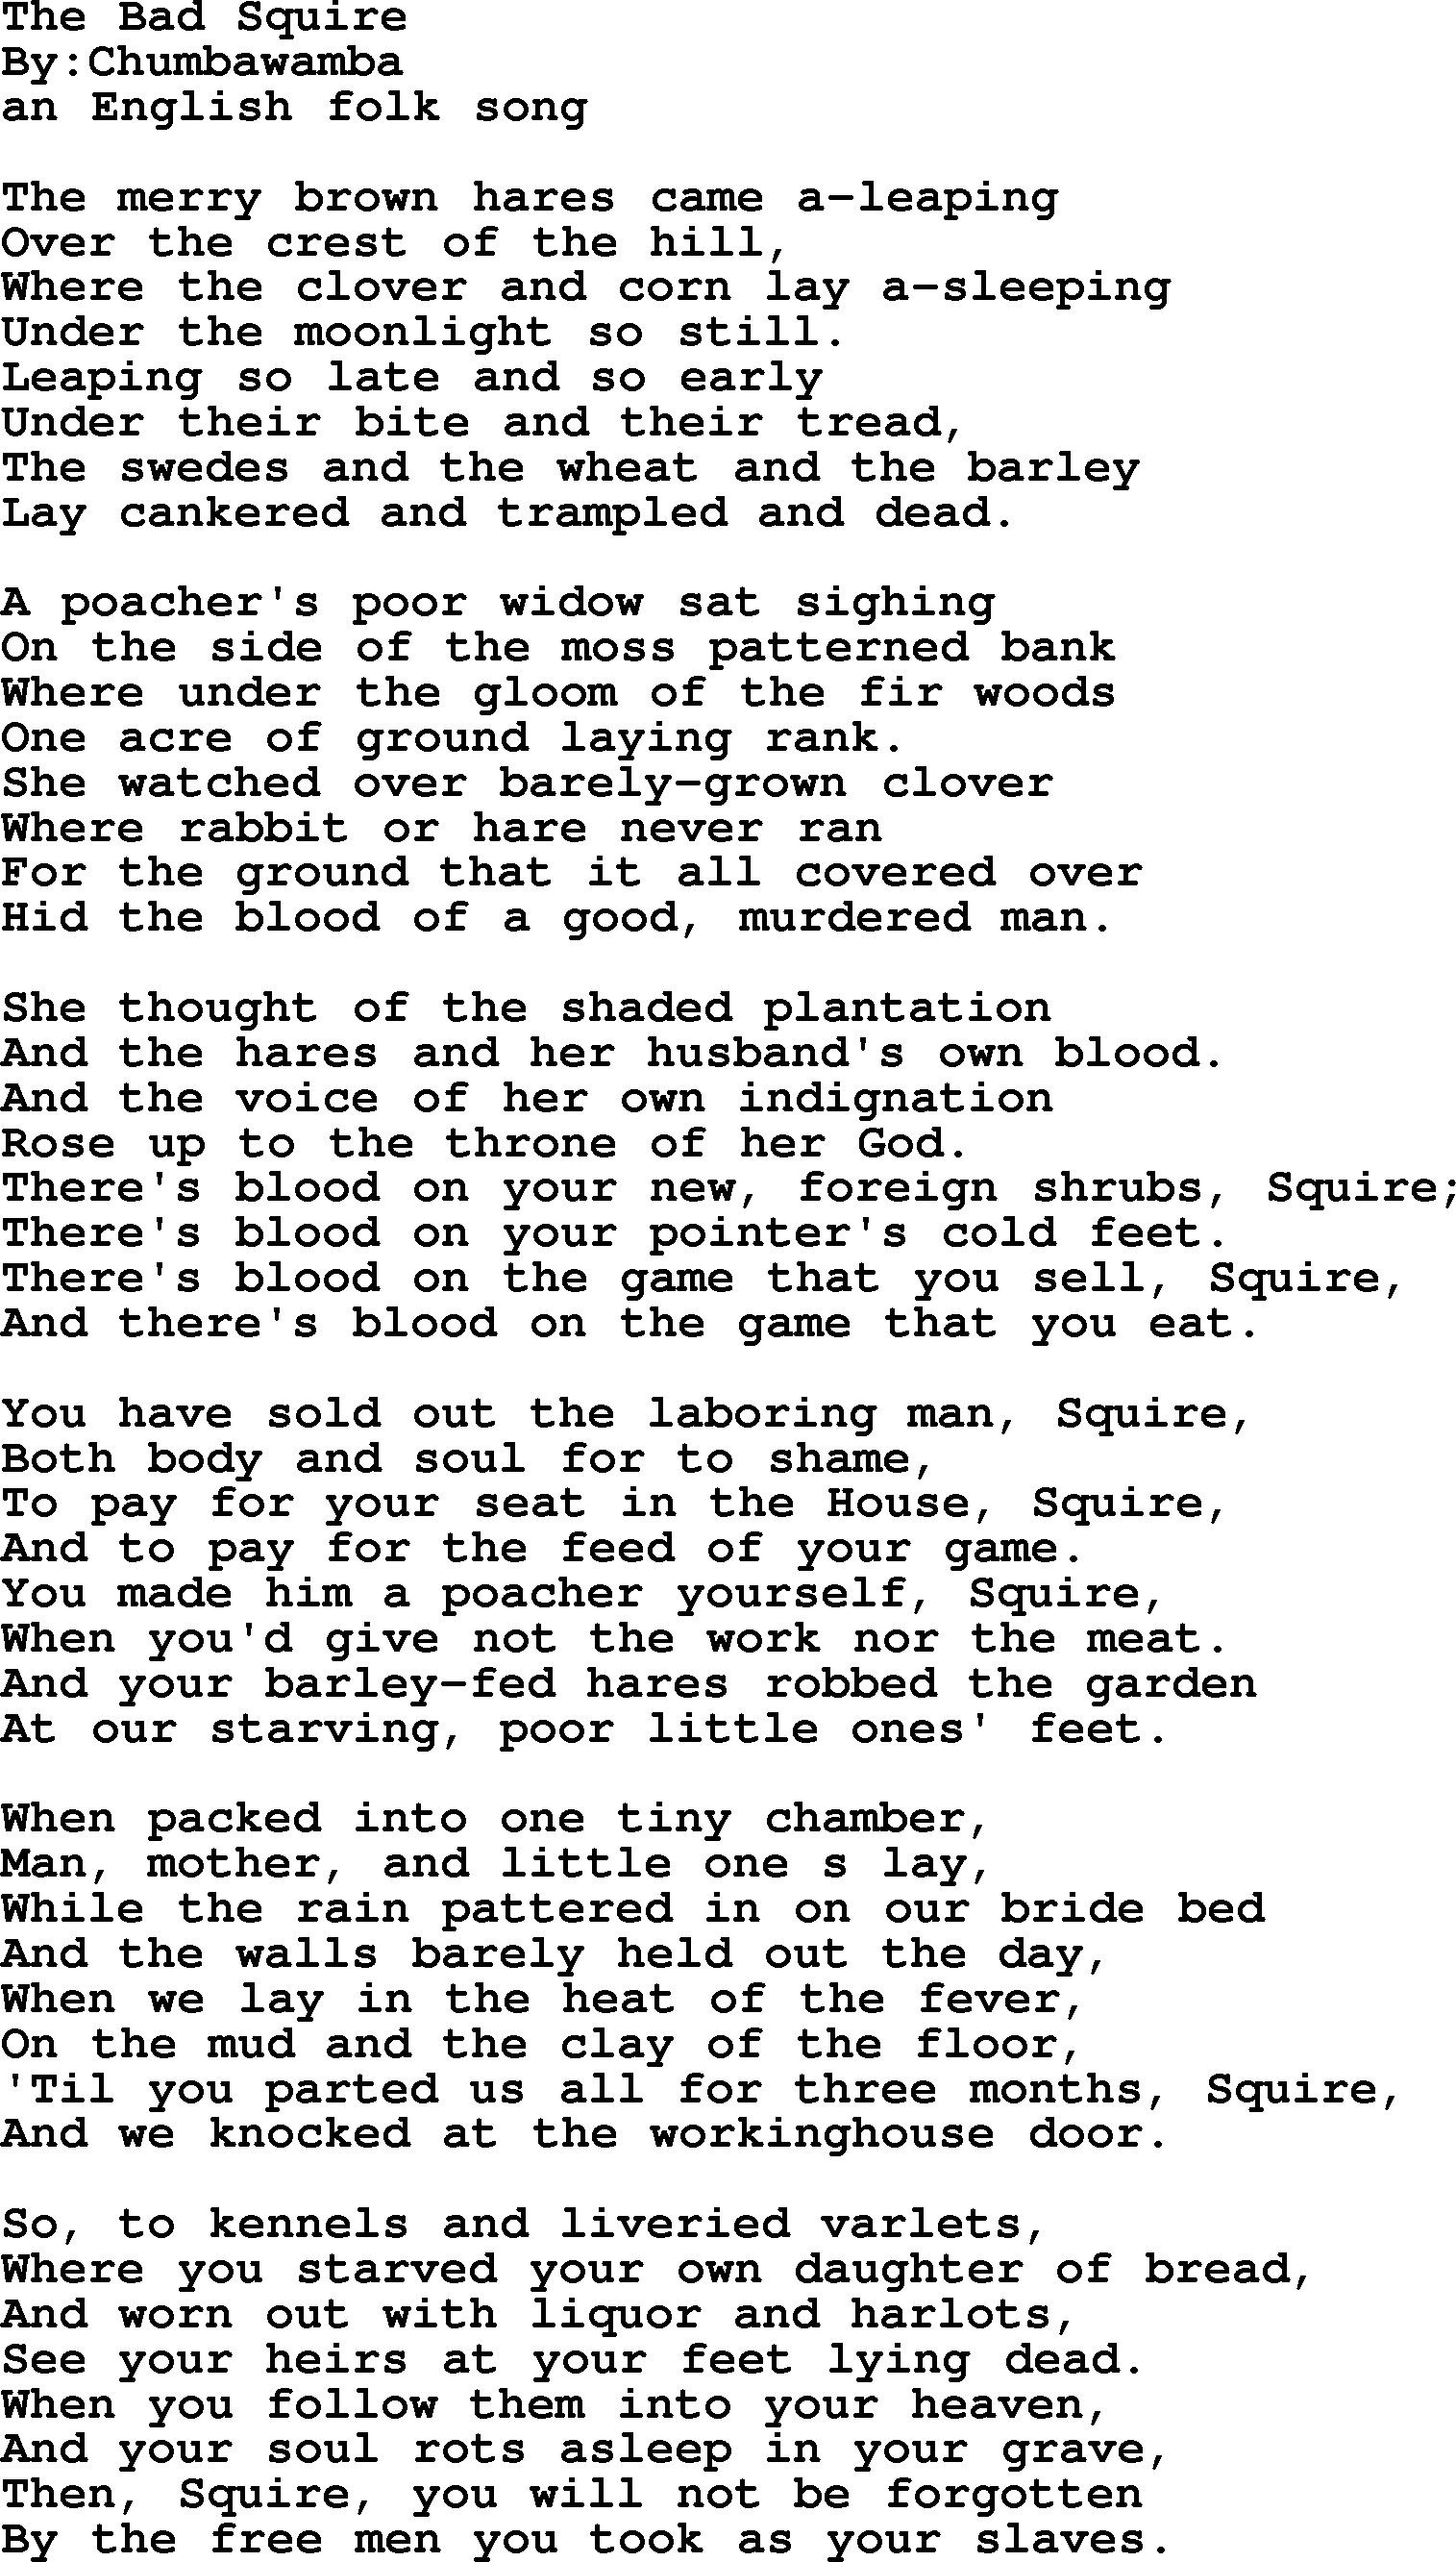 Political, Solidarity, Workers or Union song: The Bad Squire, lyrics